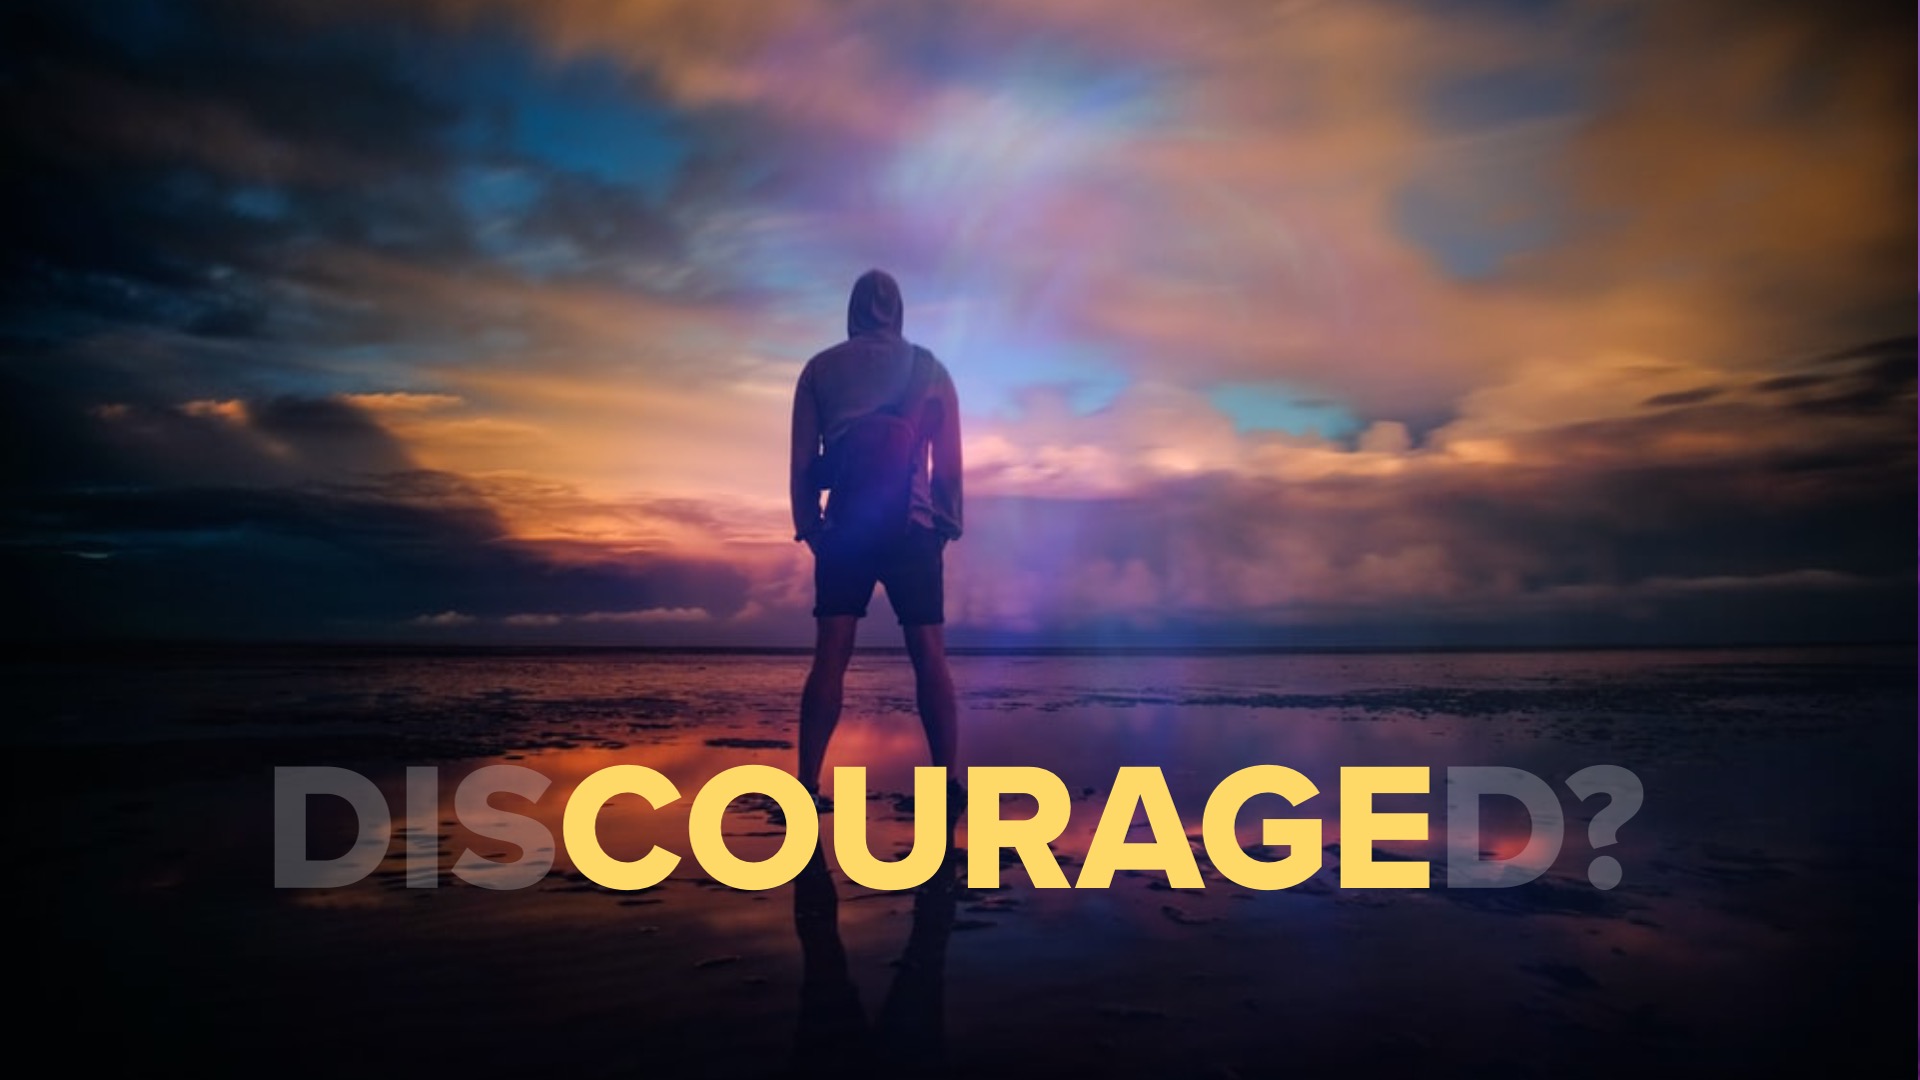 COURAGE  How to Deal with Discouragement